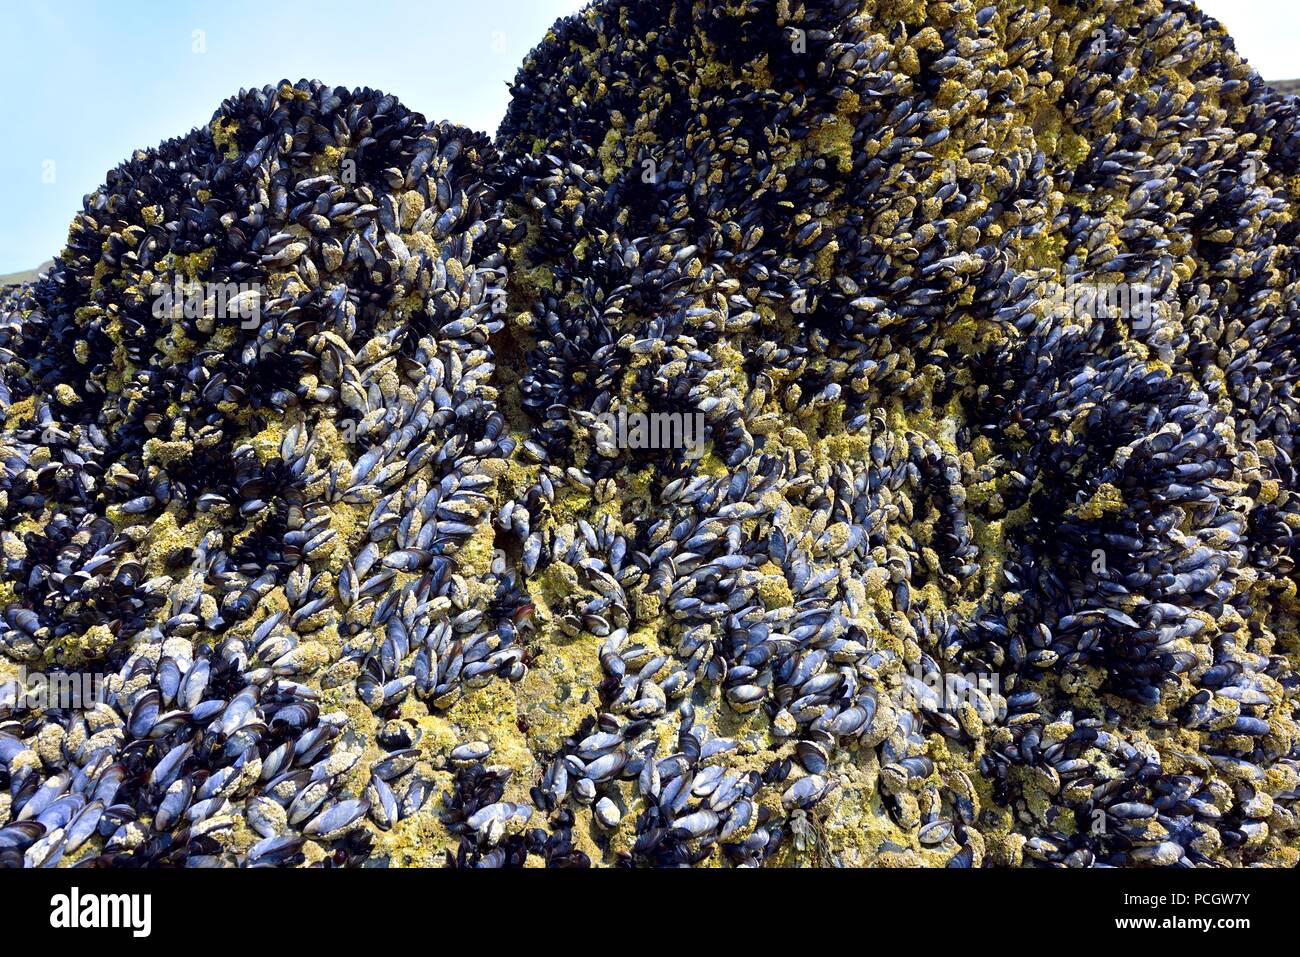 Blue mussels,common mussels,clinging to some rocks at Bedruthan steps,Cornwall,England,UK Stock Photo